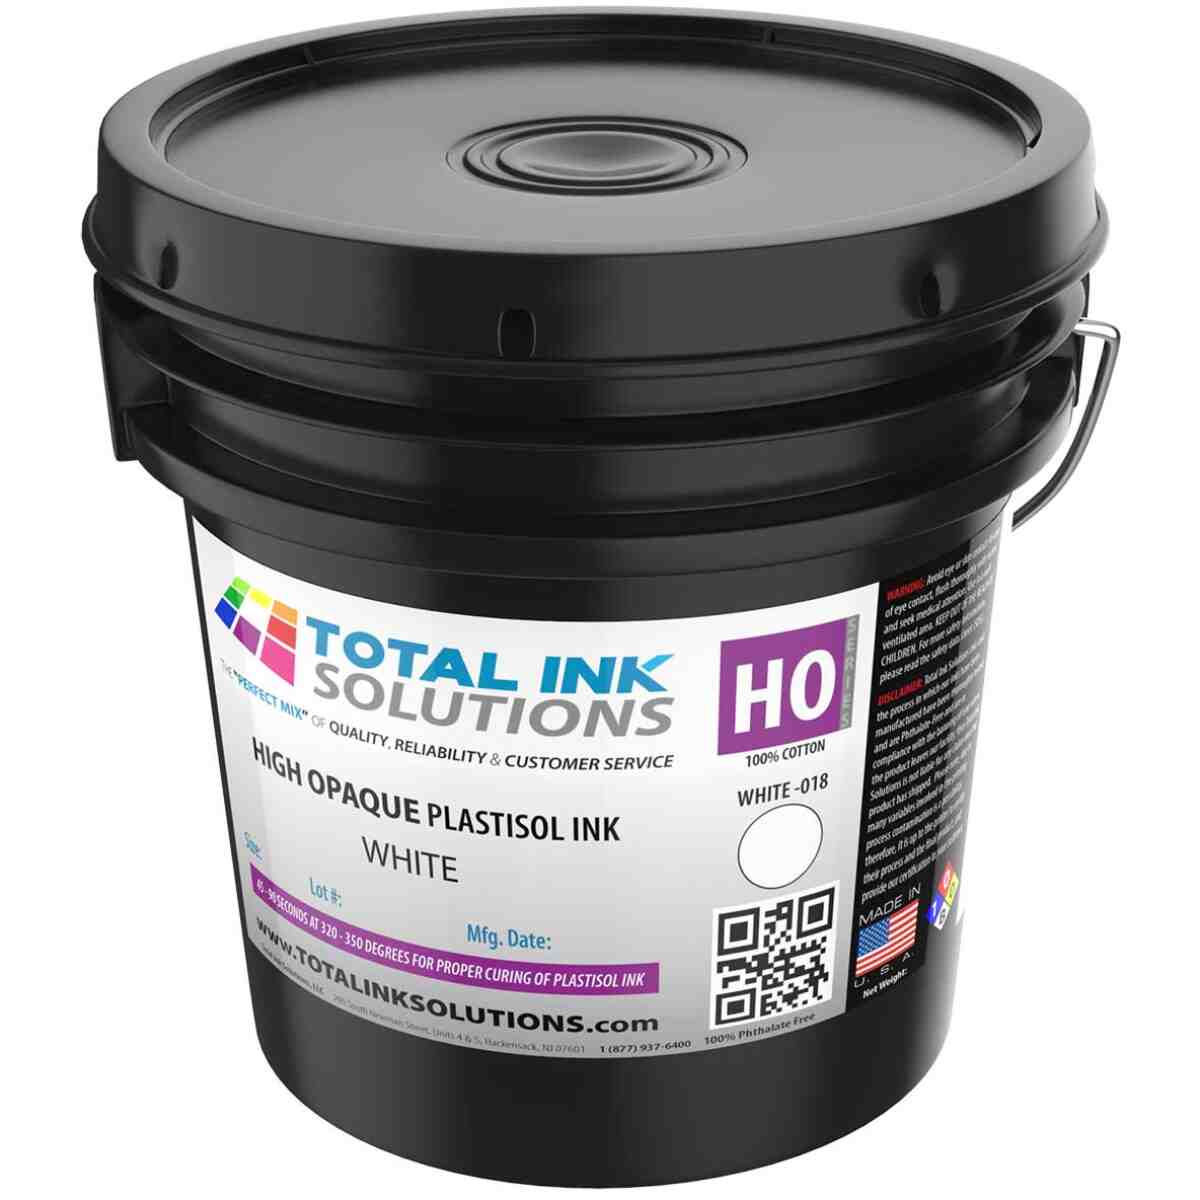 High Opaque Plastisol Ink - White - Gallon TOTAL INK SOLUTIONS®